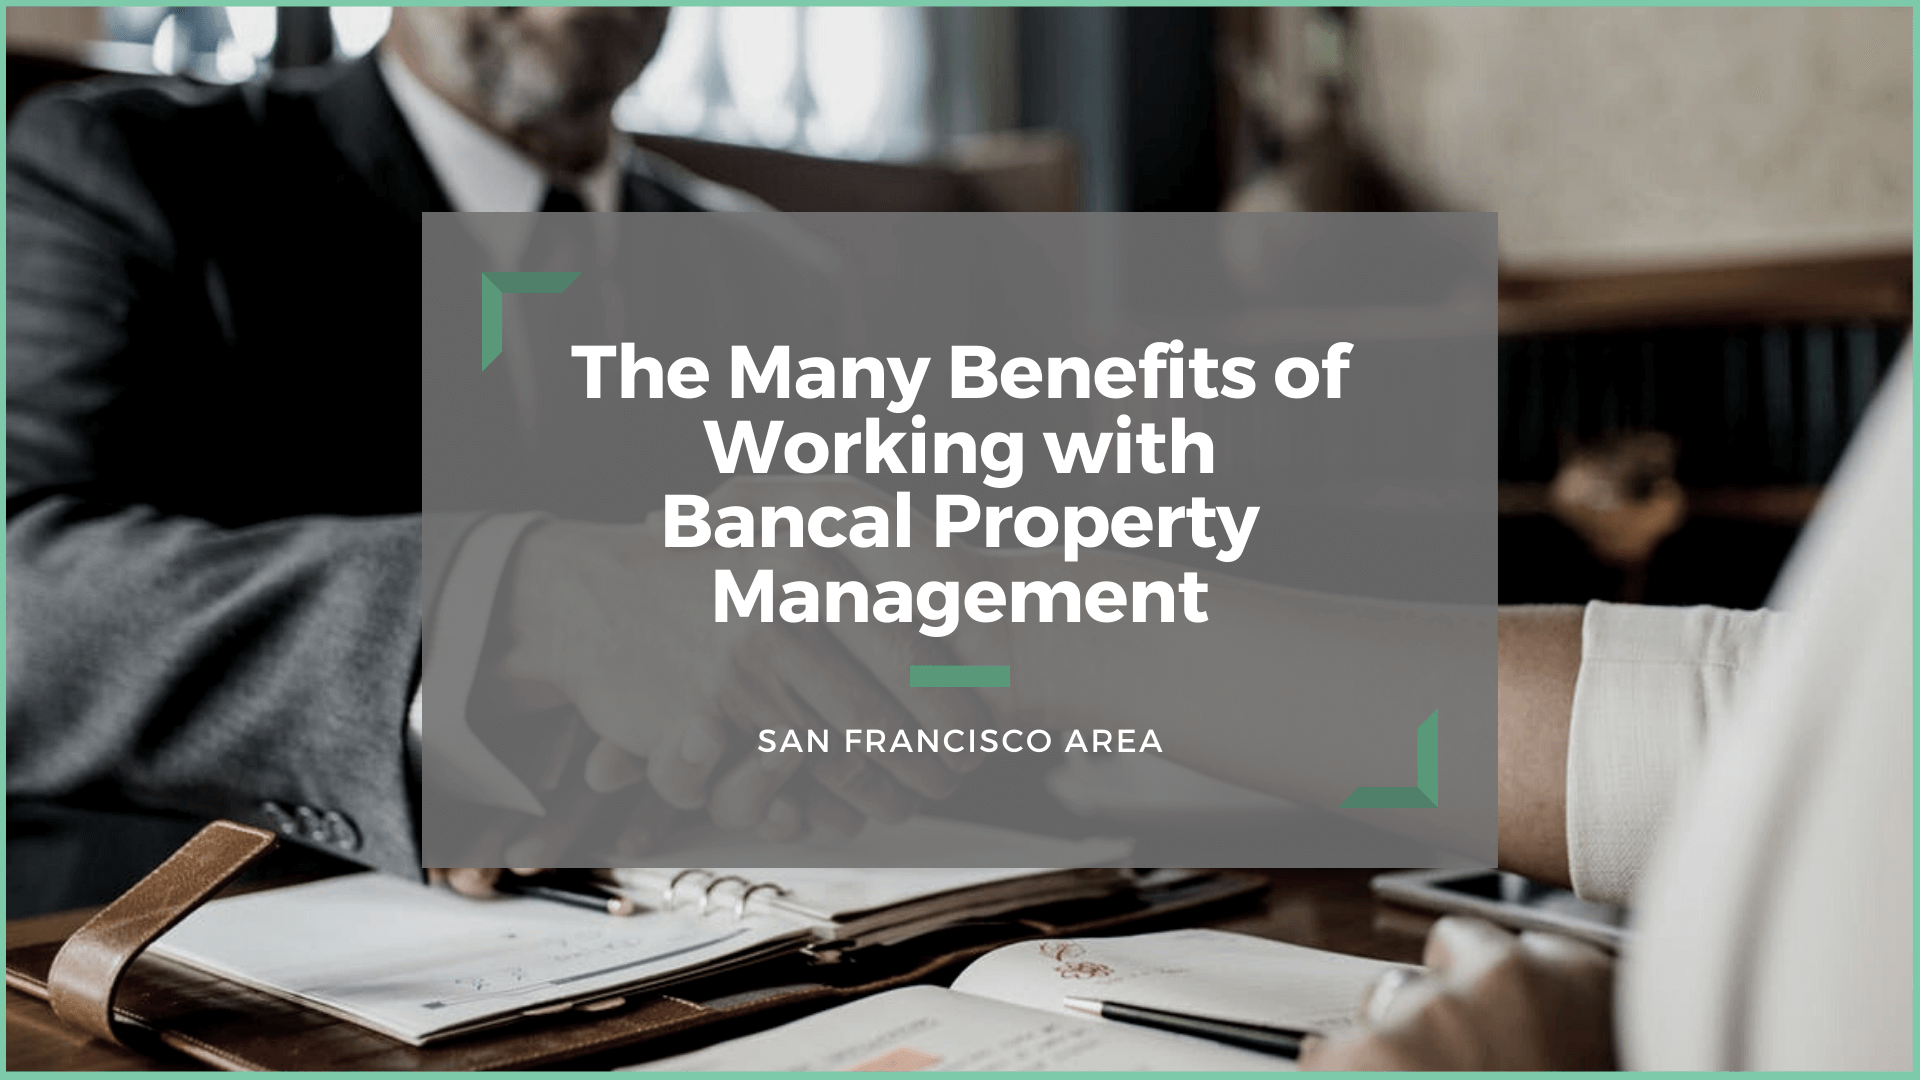 THE MANY BENEFITS OF WORKING WITH BANCAL PROPERTY MANAGEMENT FOR YOUR SAN FRANCISCO INVESTMENT PROPERTY